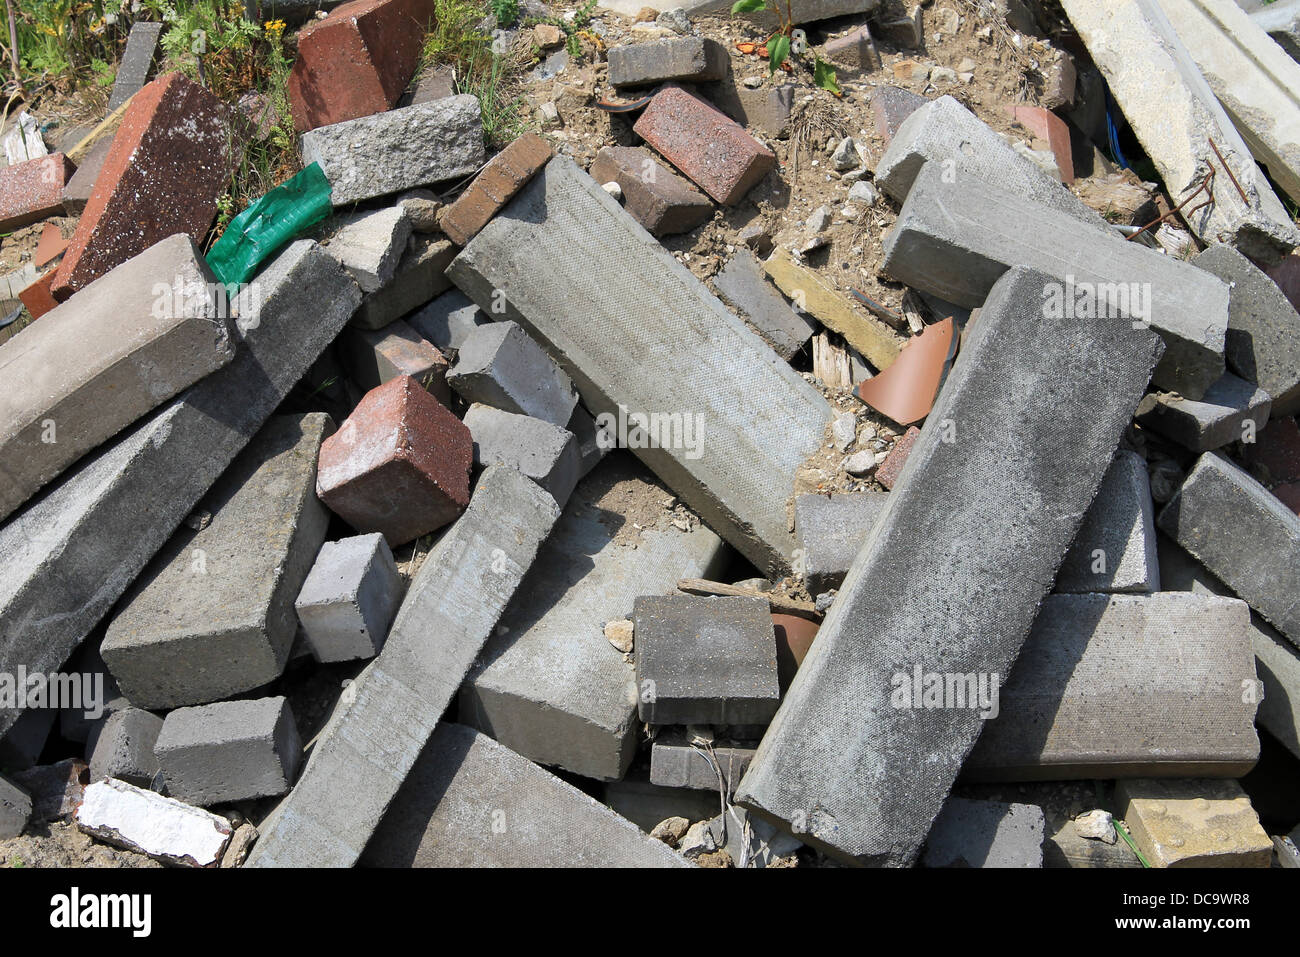 Abstract background of rubble in pile. Stock Photo